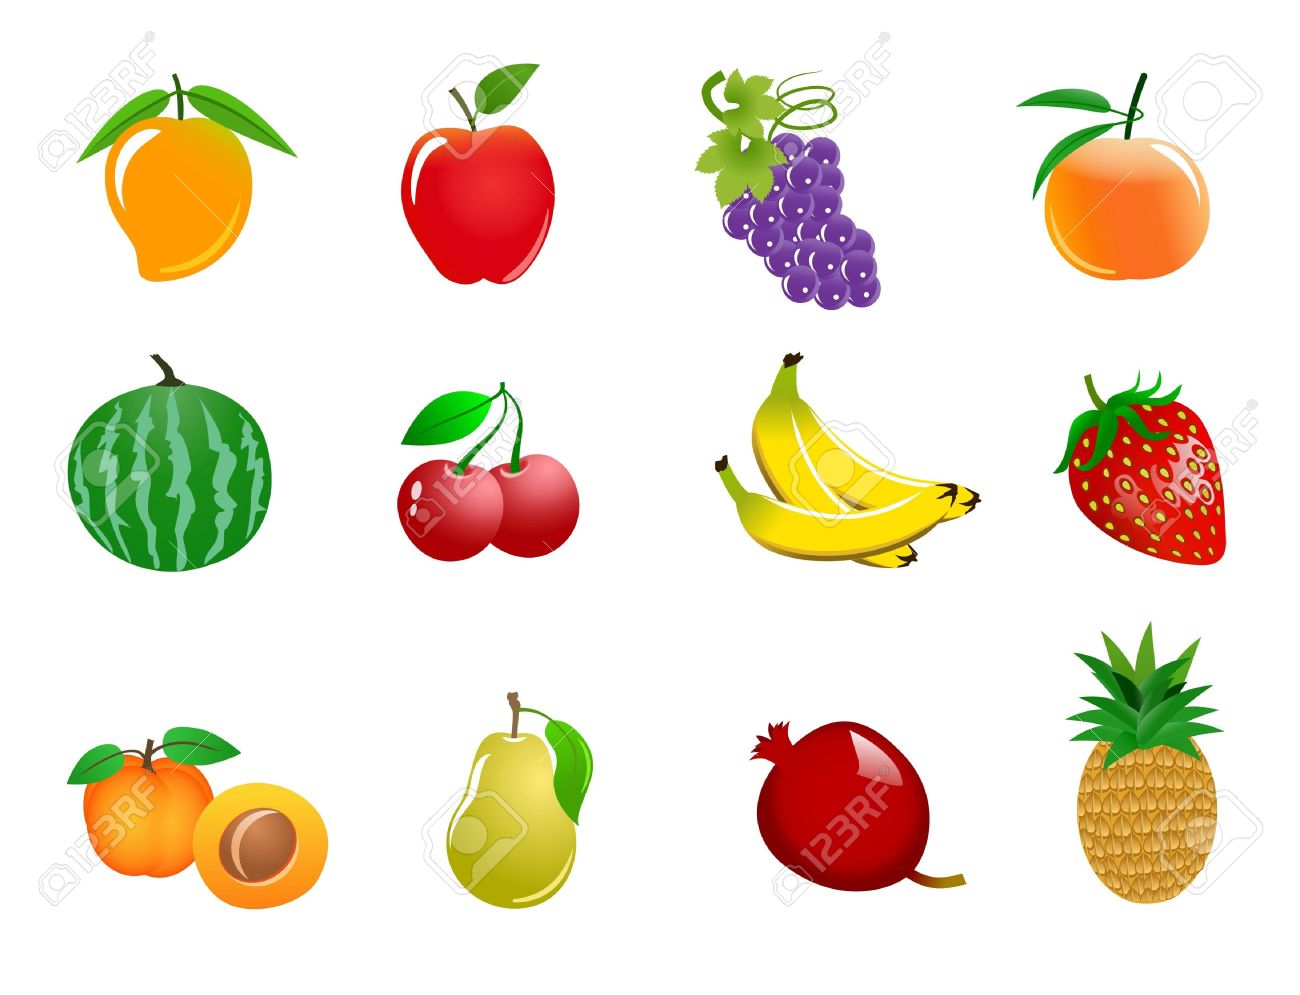 clipart of all fruits - photo #37